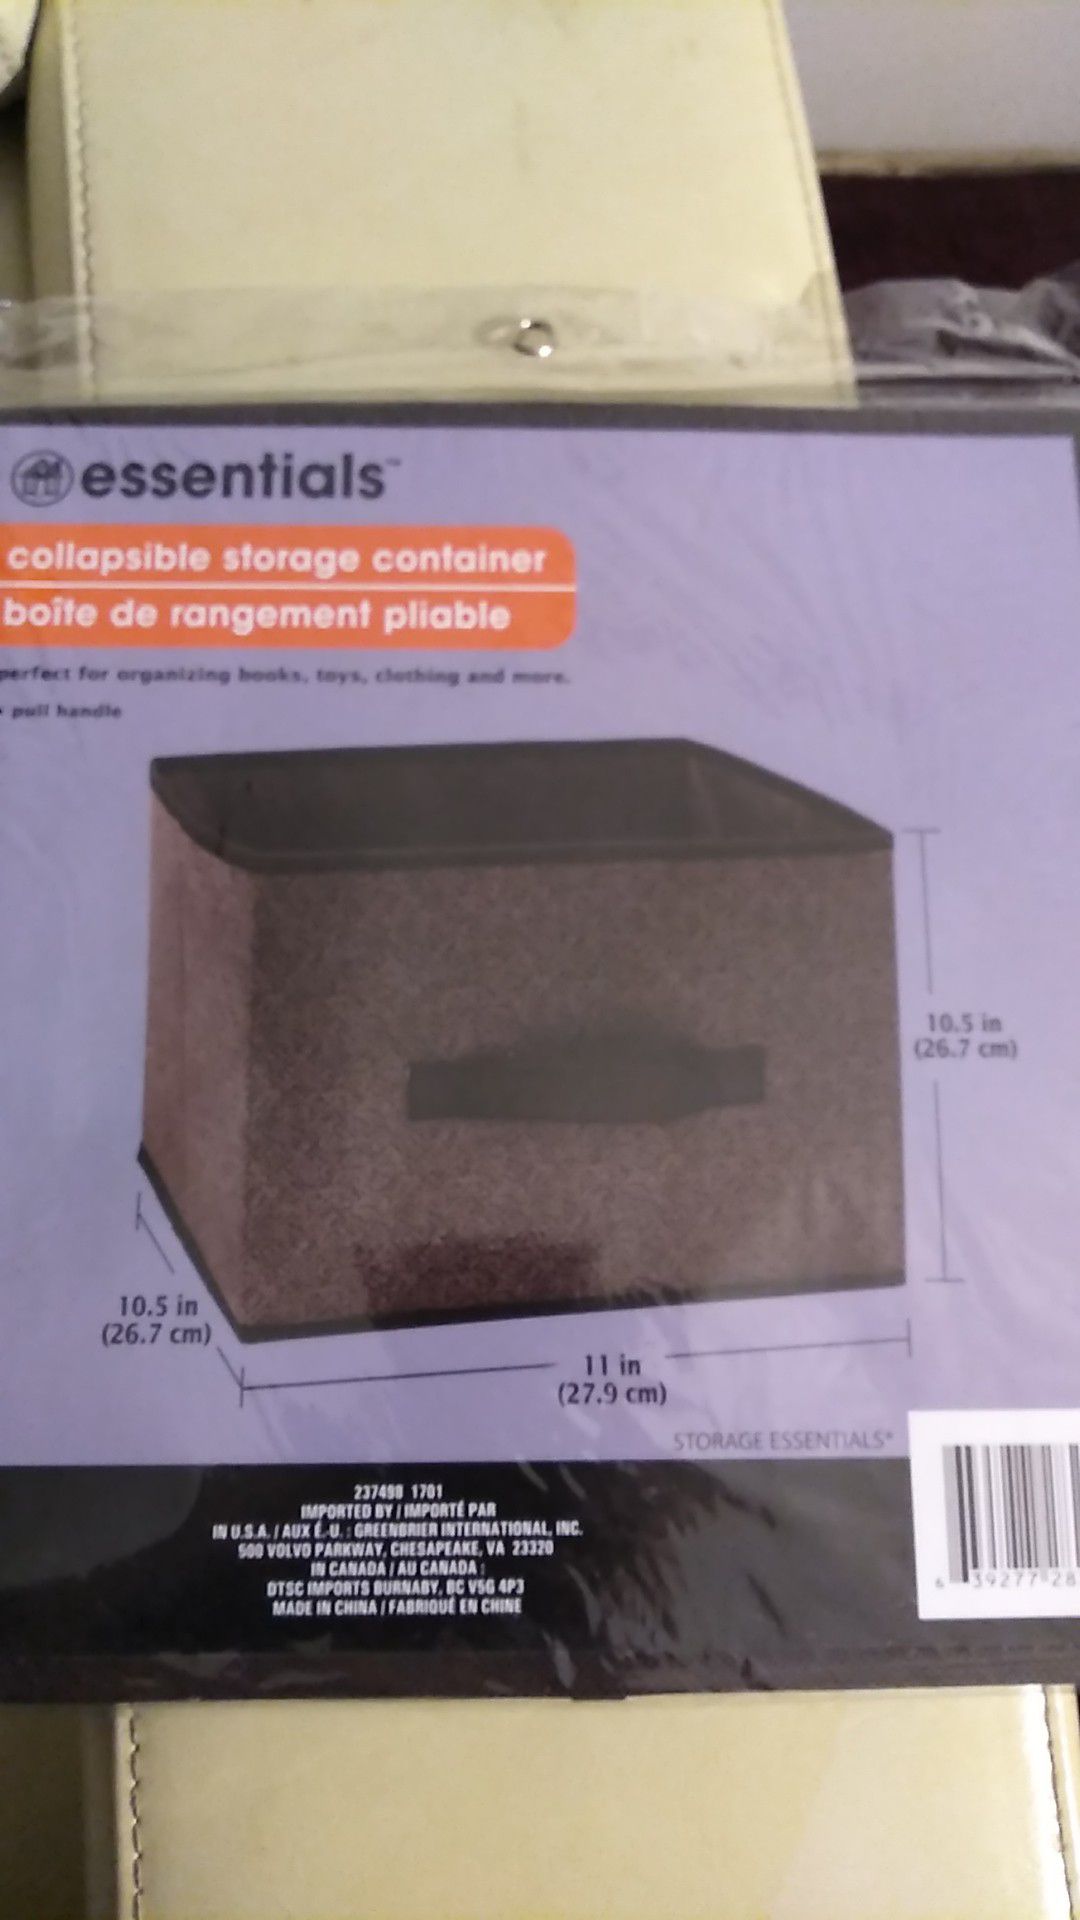 Collapsible storage container